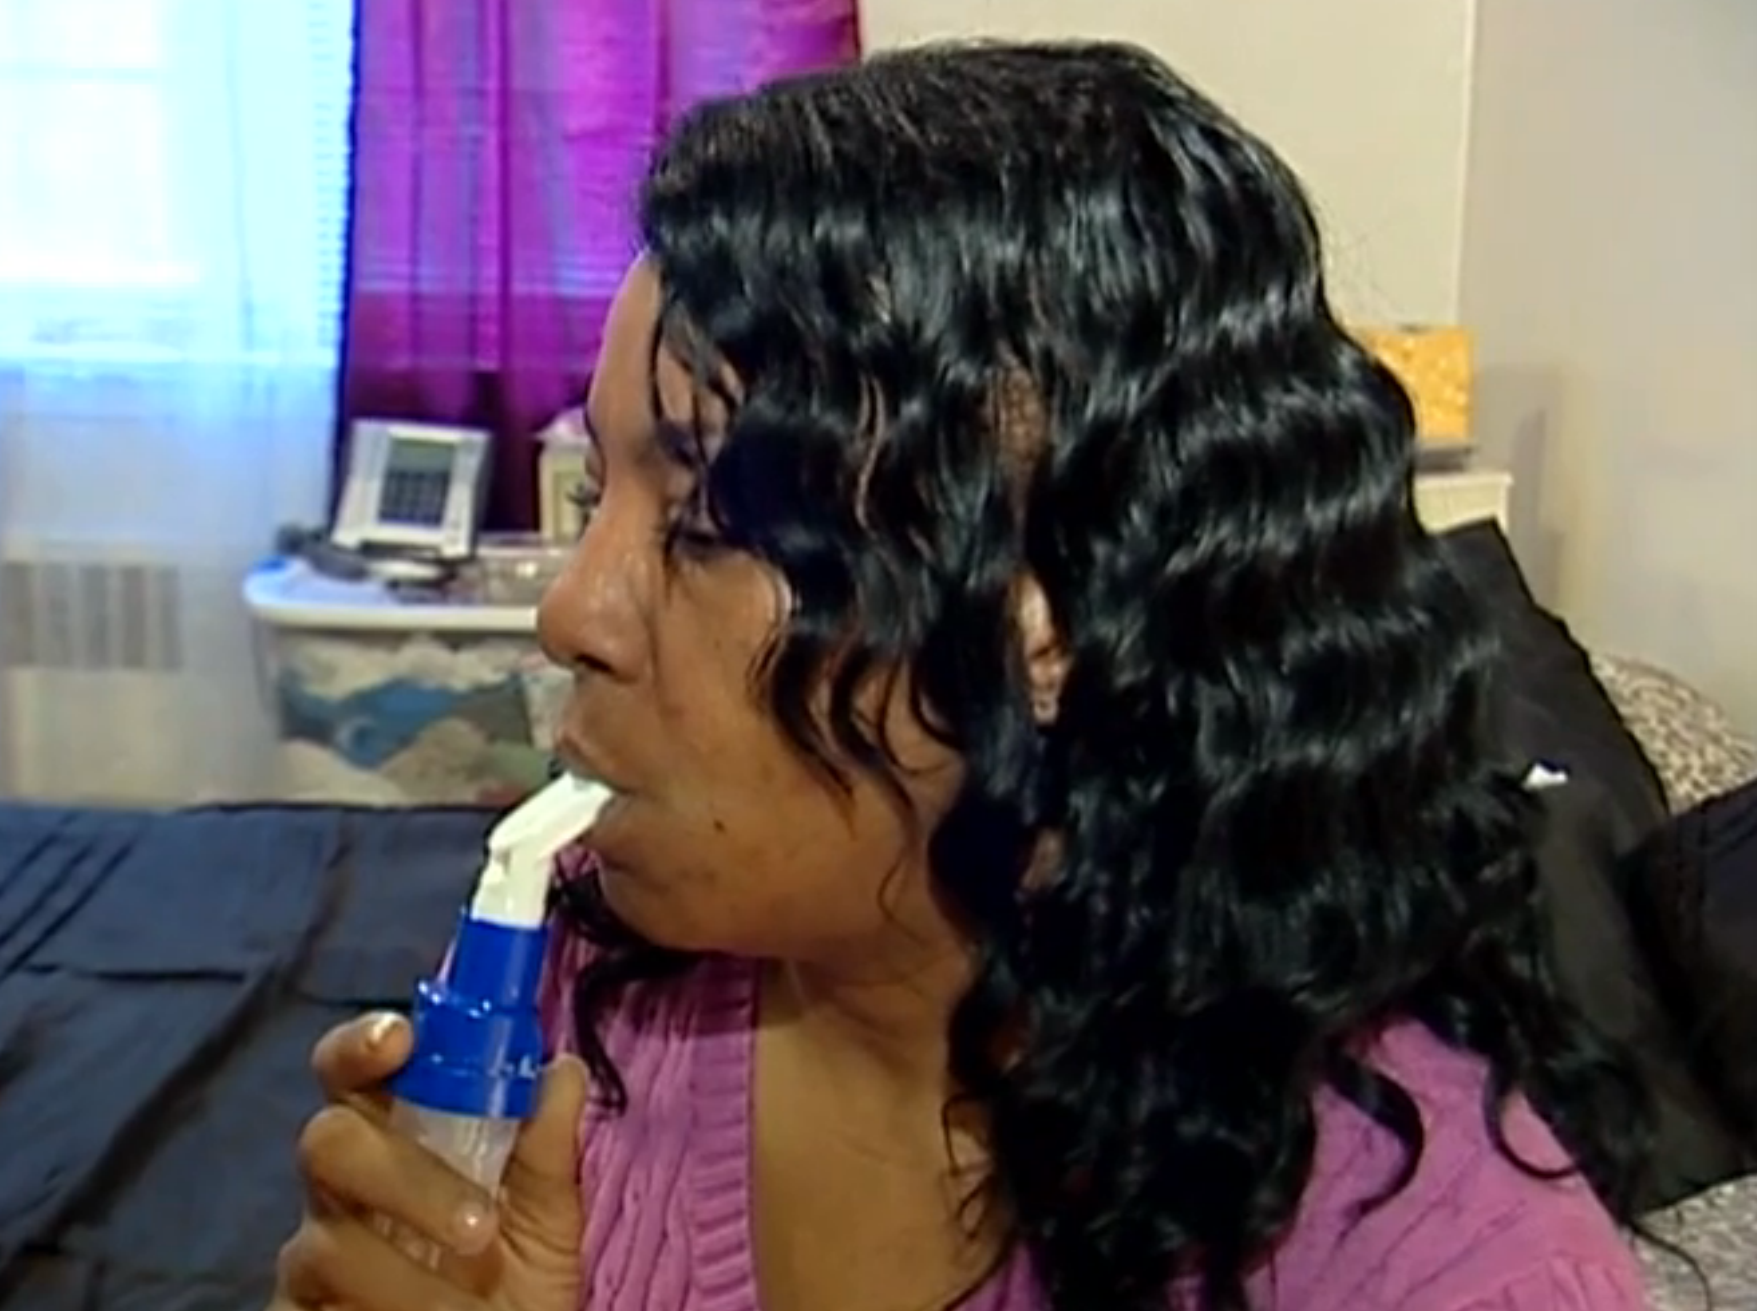 A guide for African Americans living with Asthma